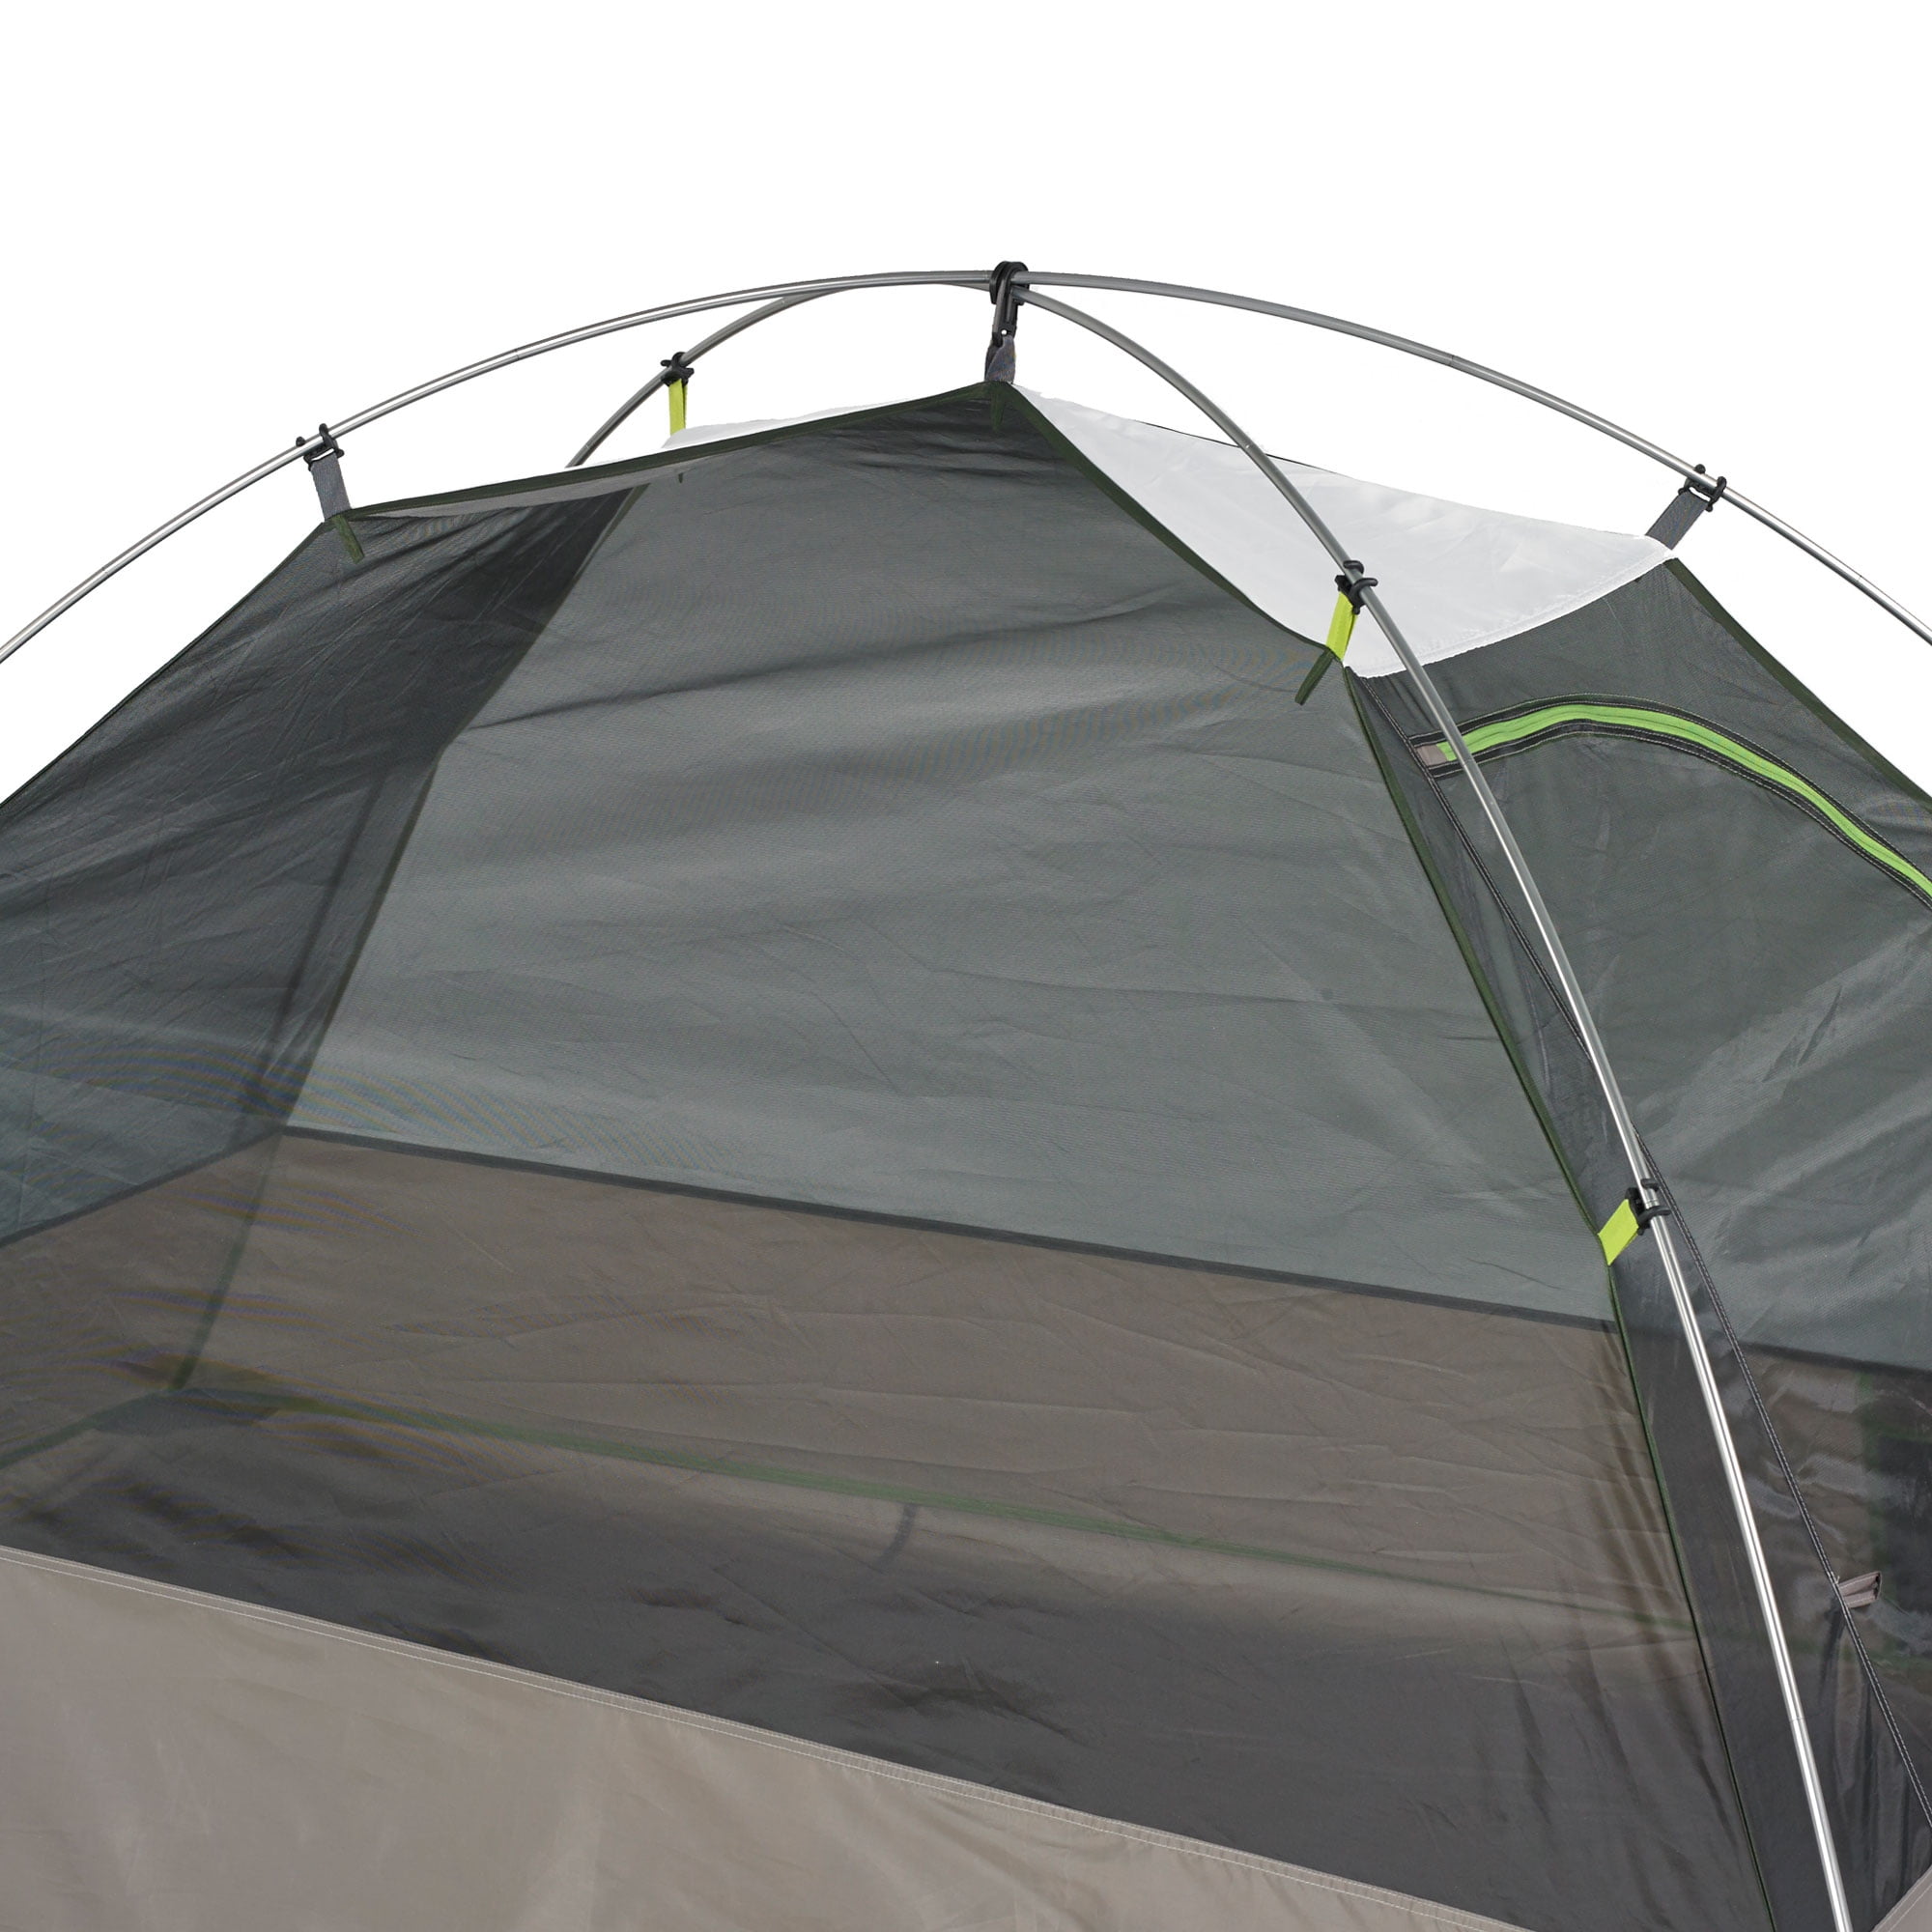 Kelty Grand Mesa Tent â€“ 2 Person Camping Tent